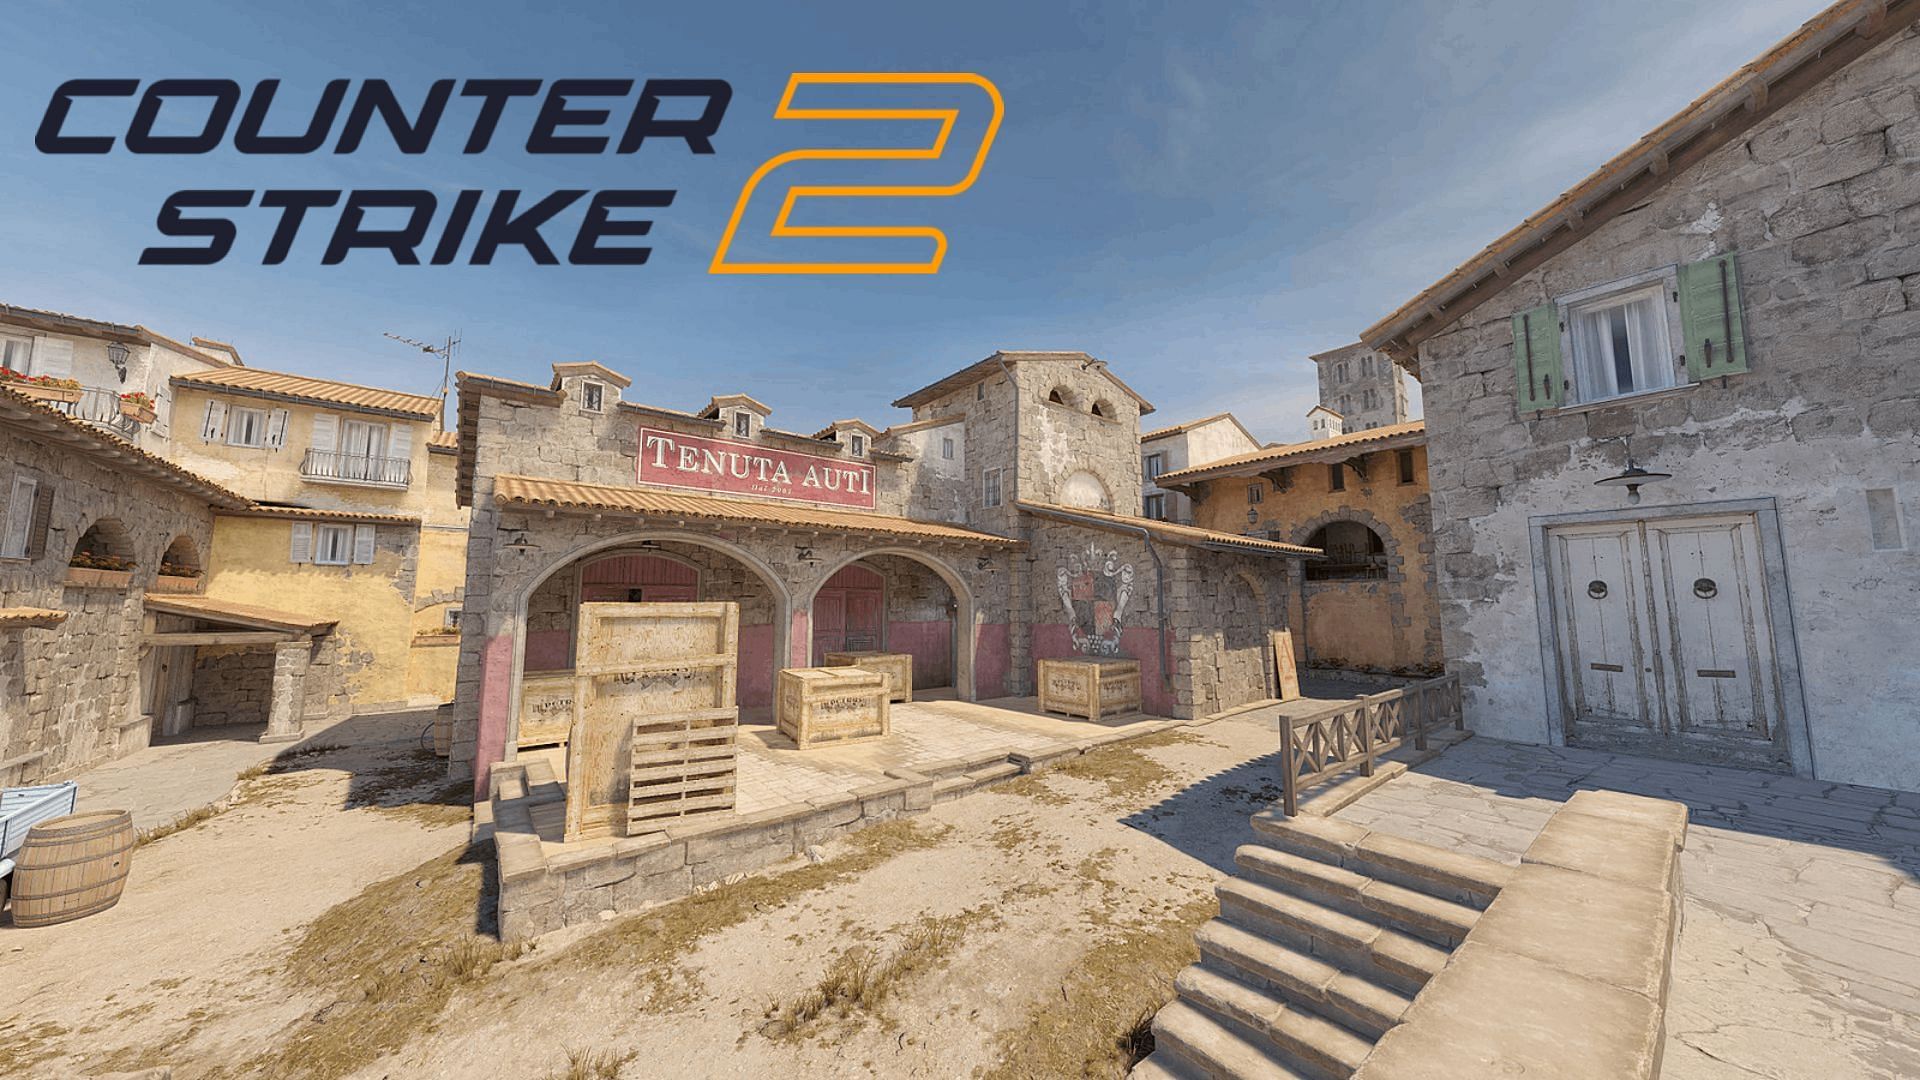 Counter-Strike 2 Patch Notes, Check The Latest Updates - News